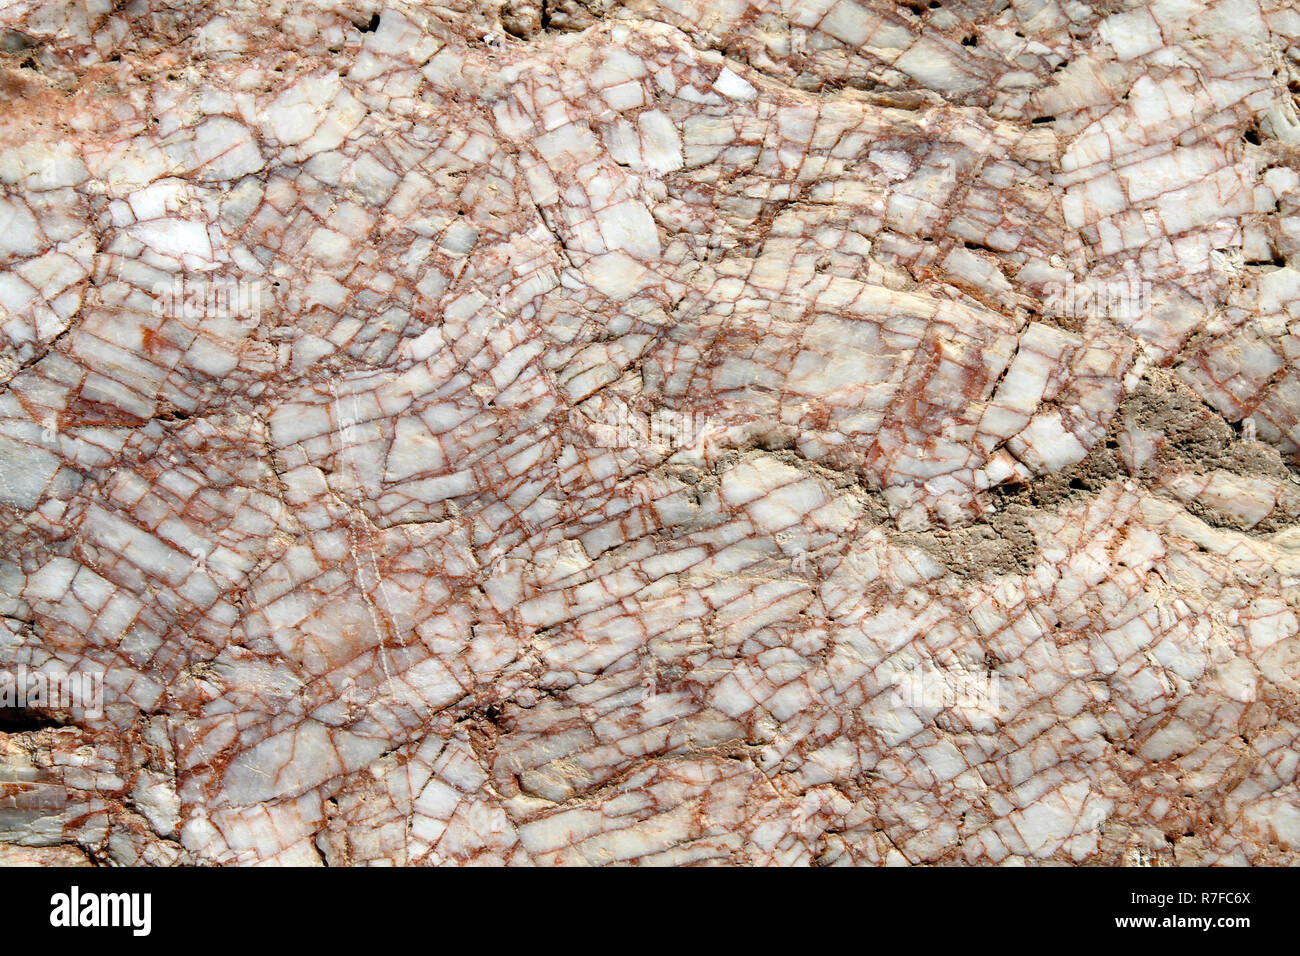 fractured milking quartz rock with iron staining between cracks Stock Photo